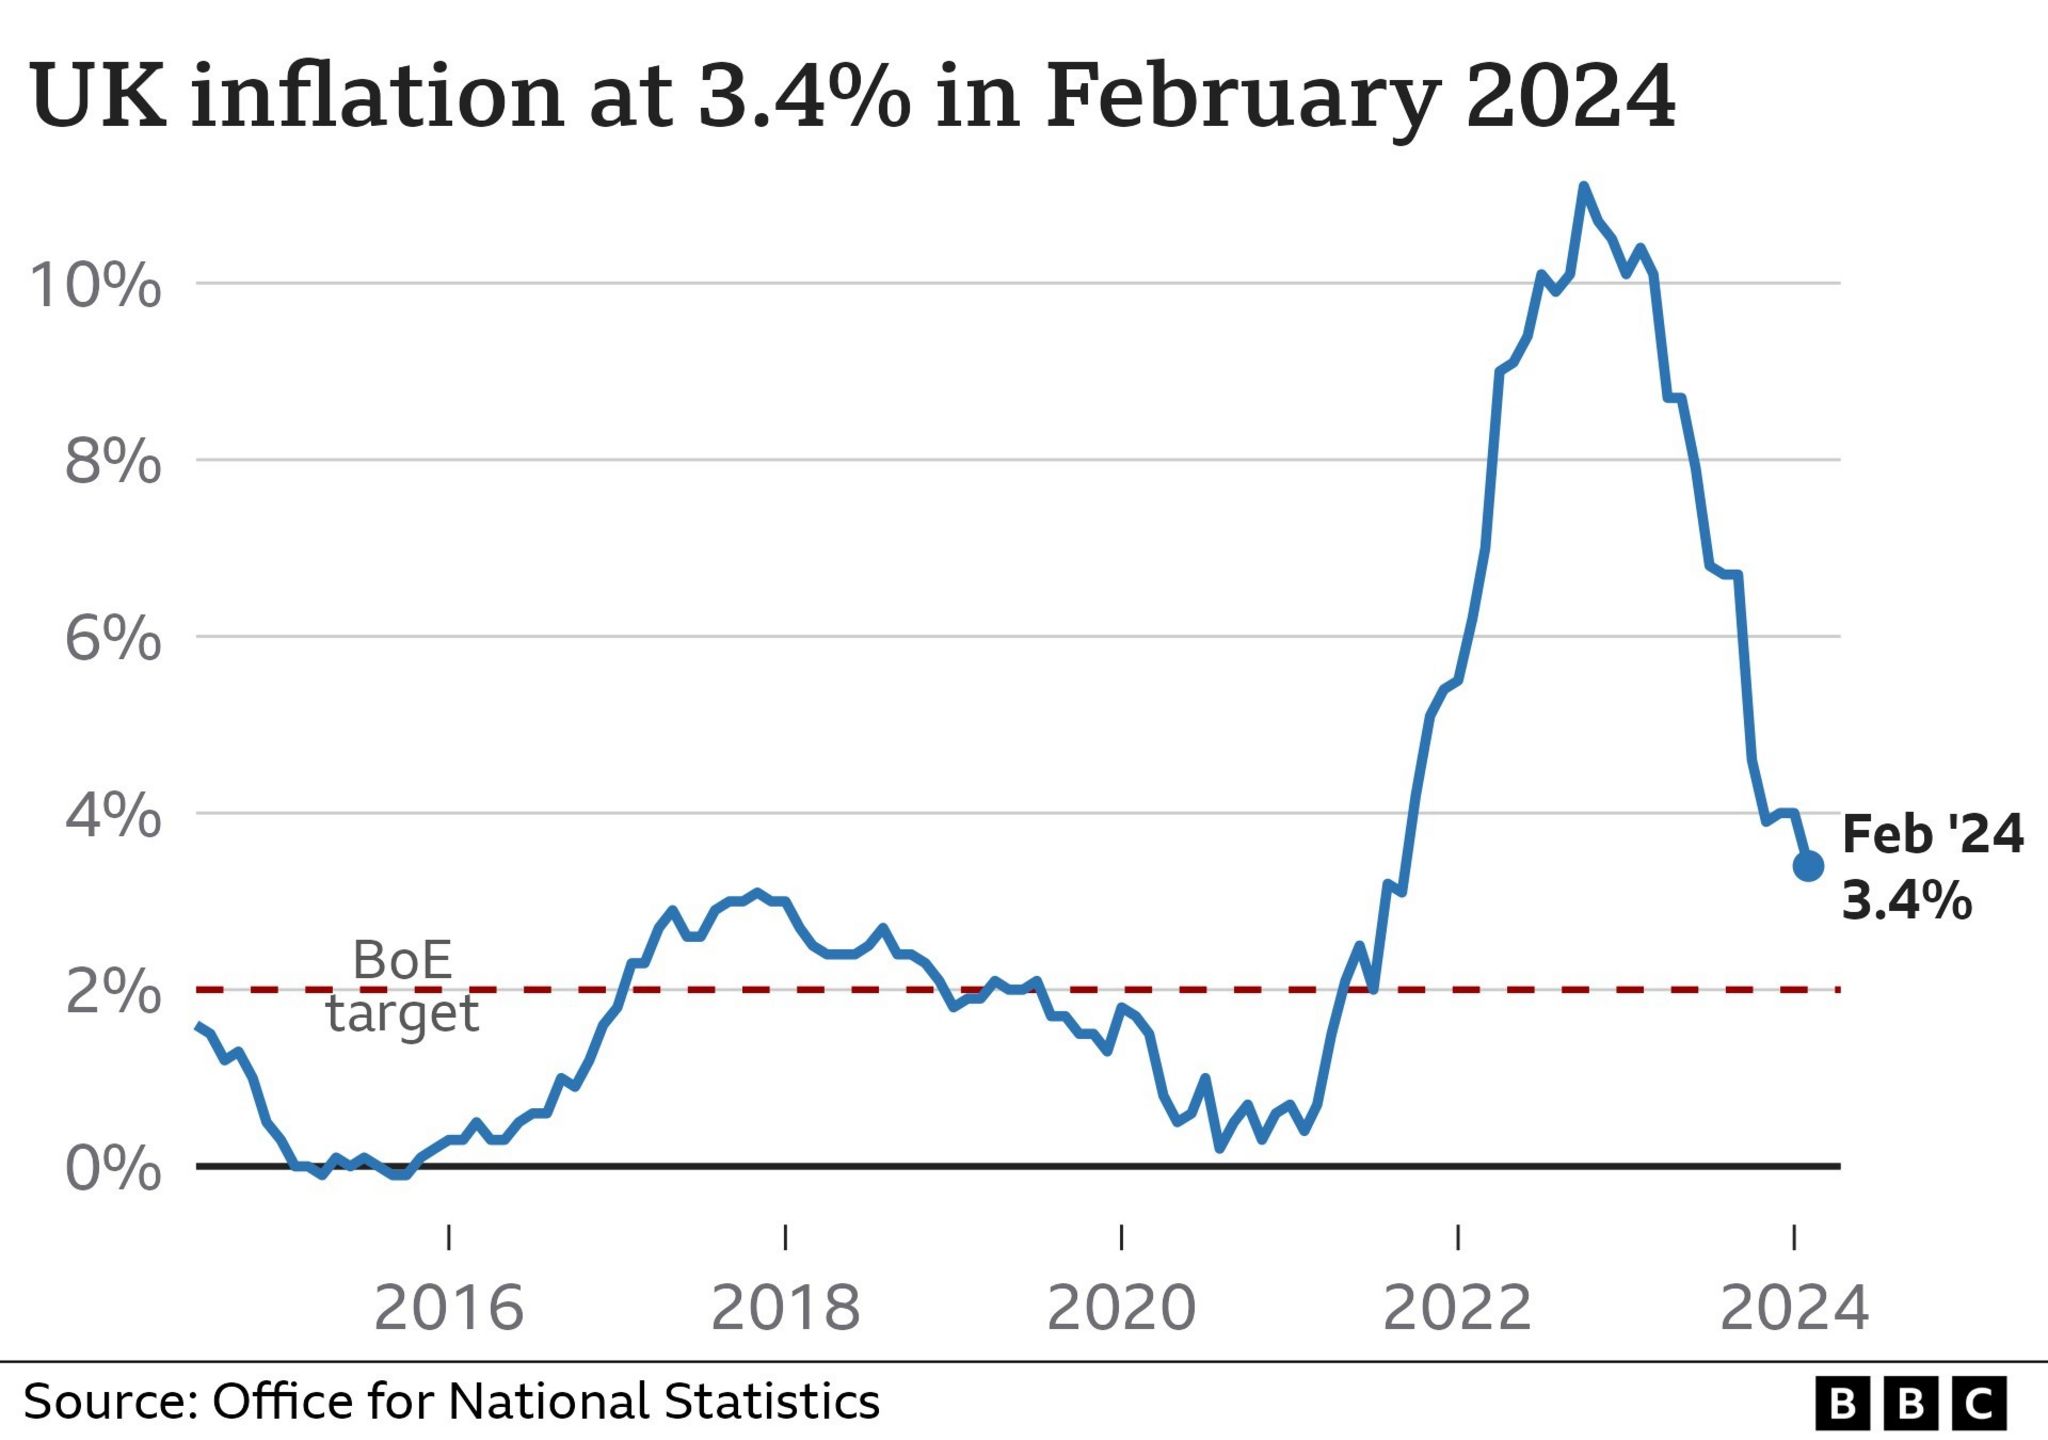 Chart showing UK inflation at 3.4% in February